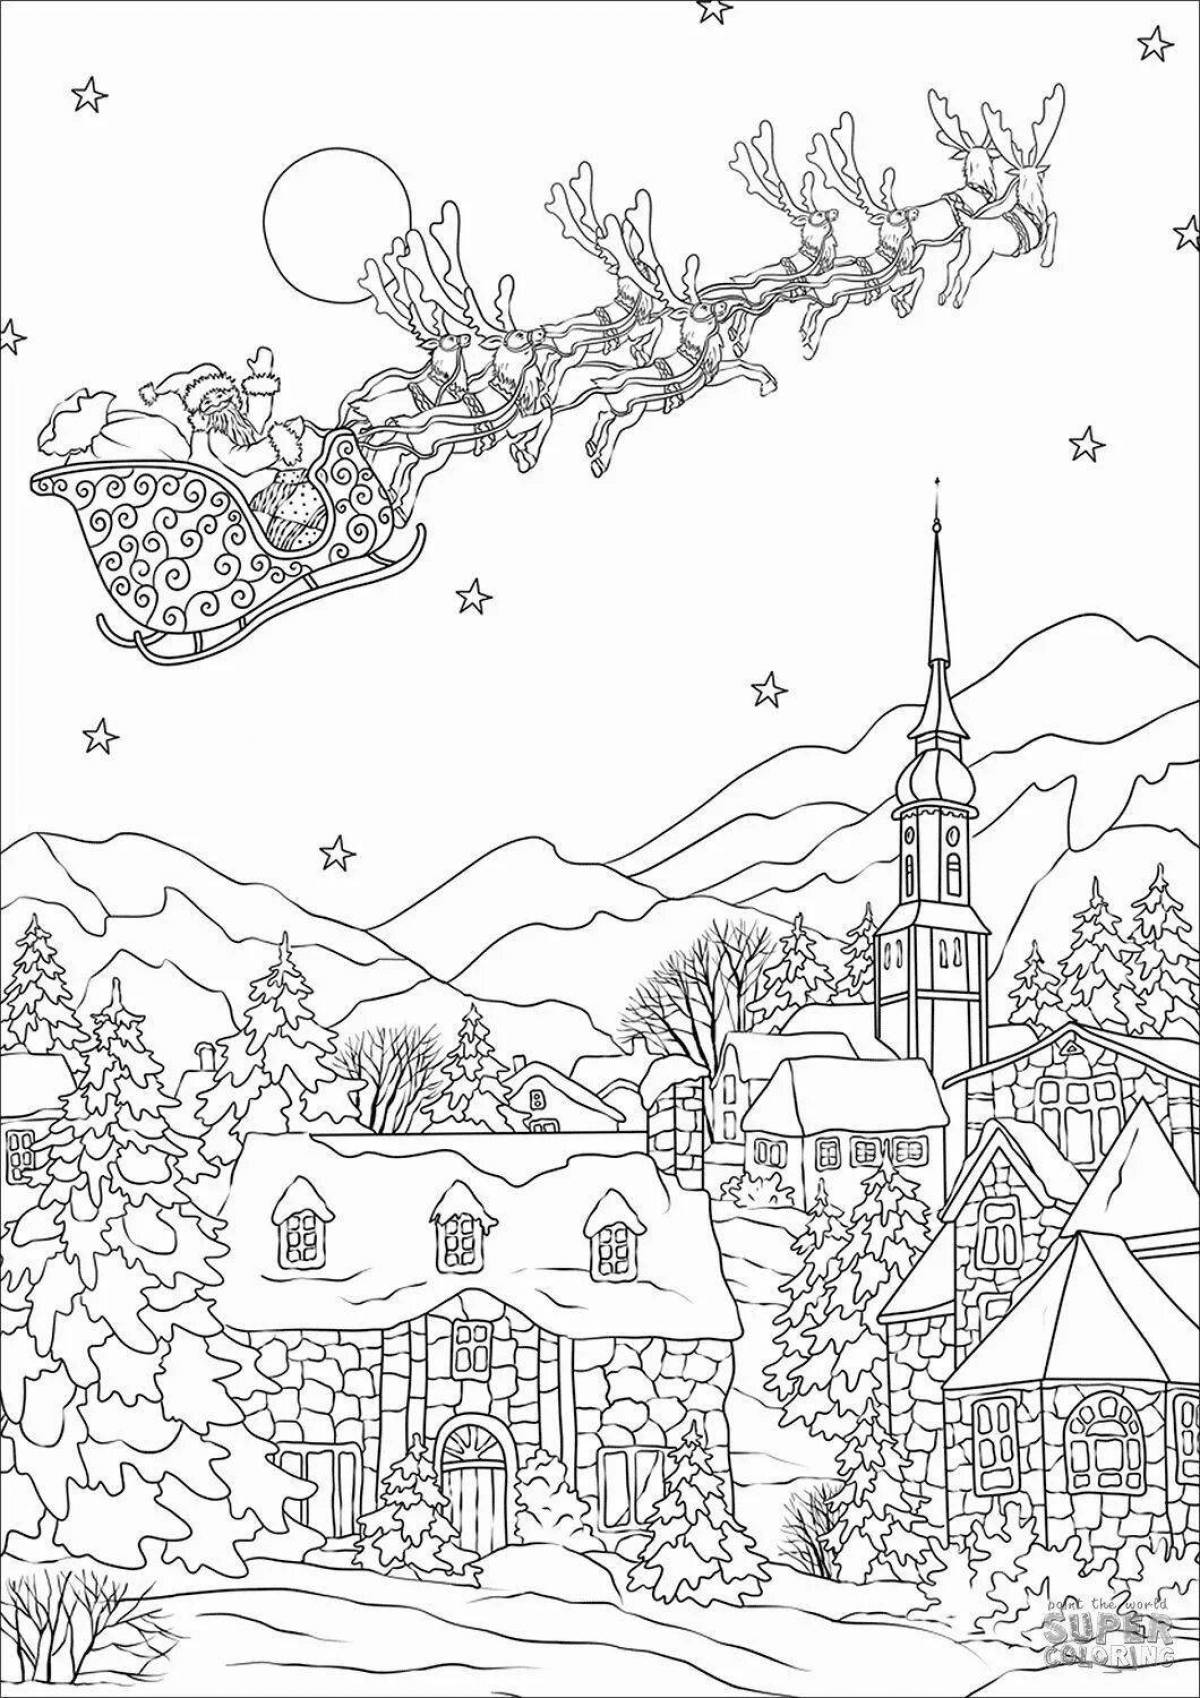 A fascinating winter night coloring book